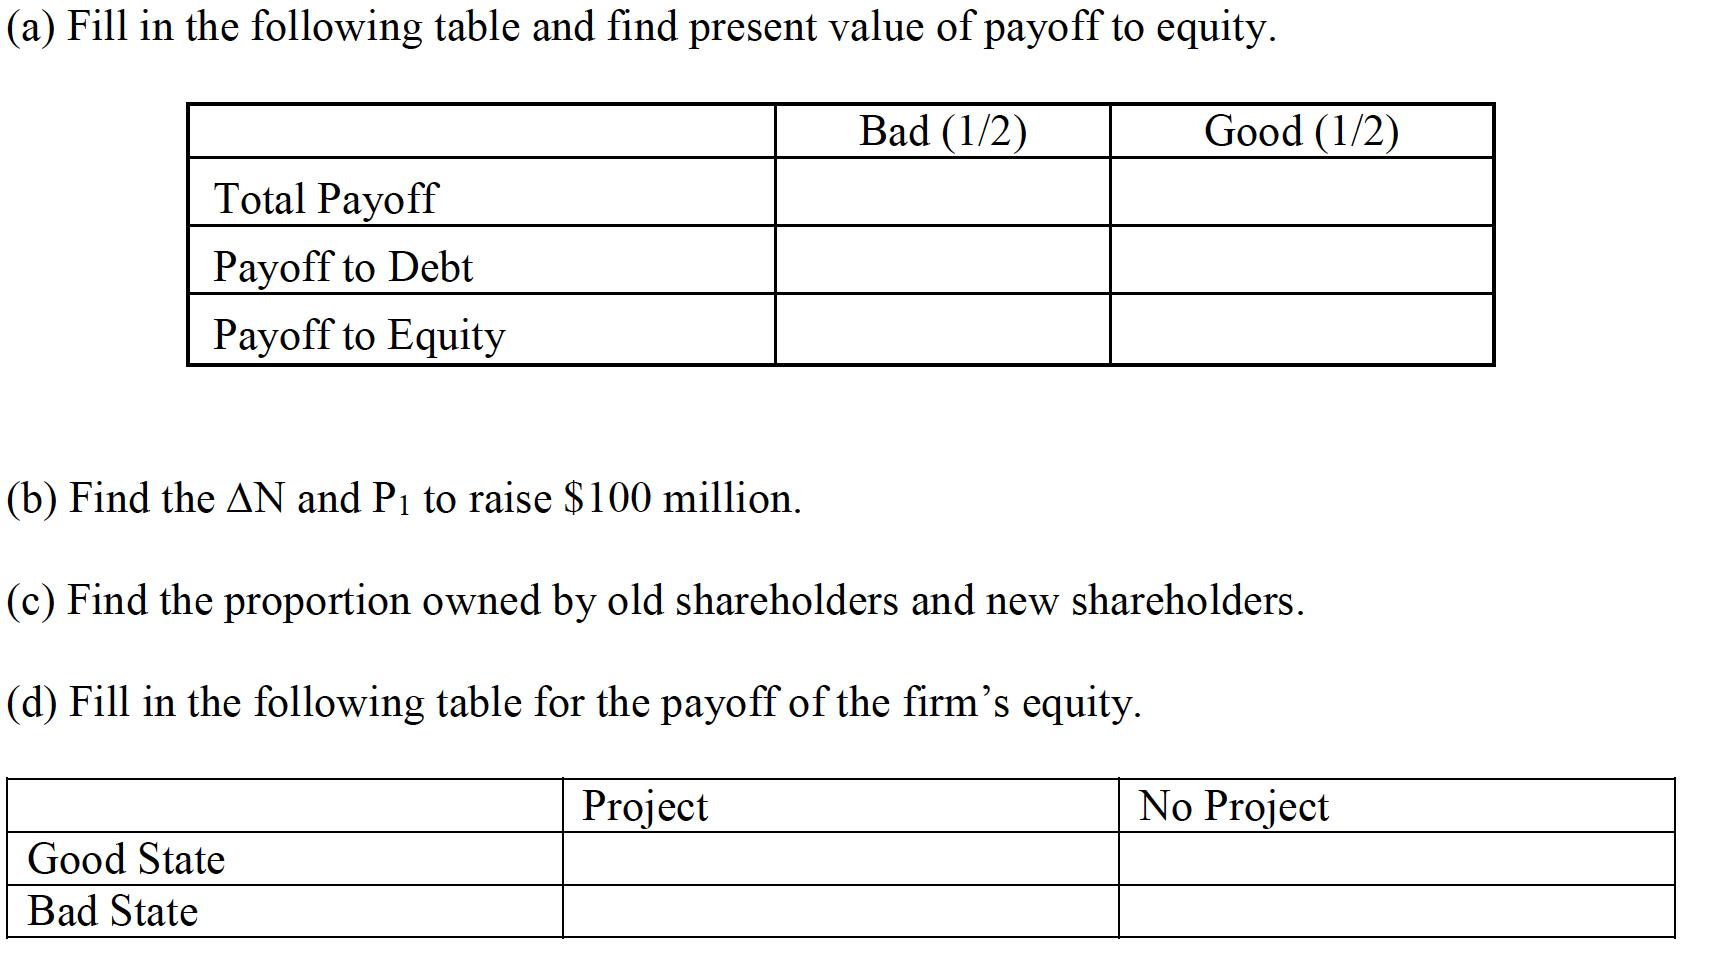 (a) Fill in the following table and find present value of payoff to equity. Bad (1/2) Good (1/2) Total Payoff Payoff to Debt